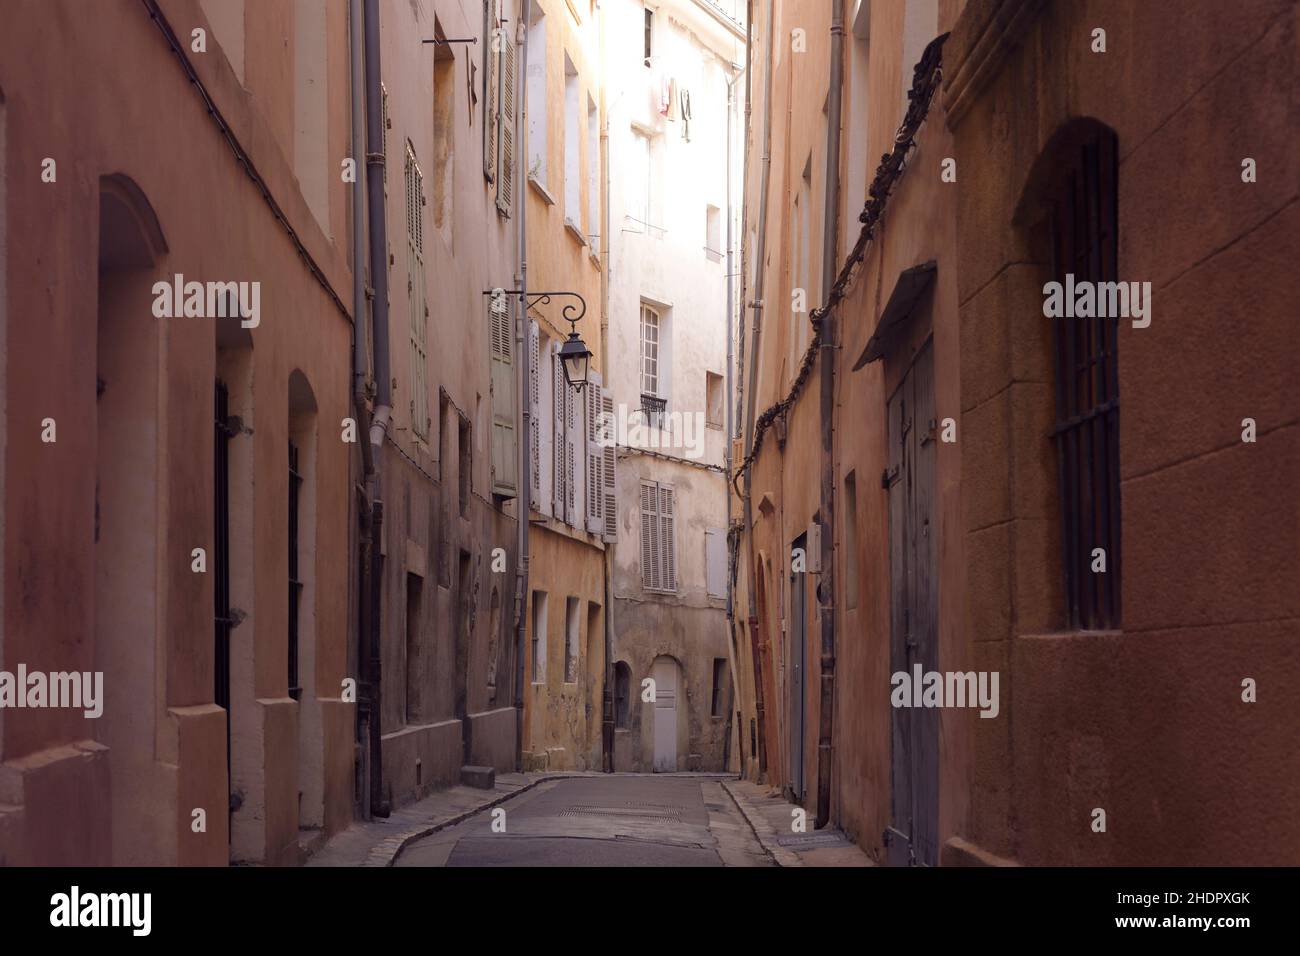 Narrow passage way between old crooked stone houses on a street of a French city Aix-en-Provence, Provence-Alpes-Côte d'Azur, Provence, South of Franc Stock Photo